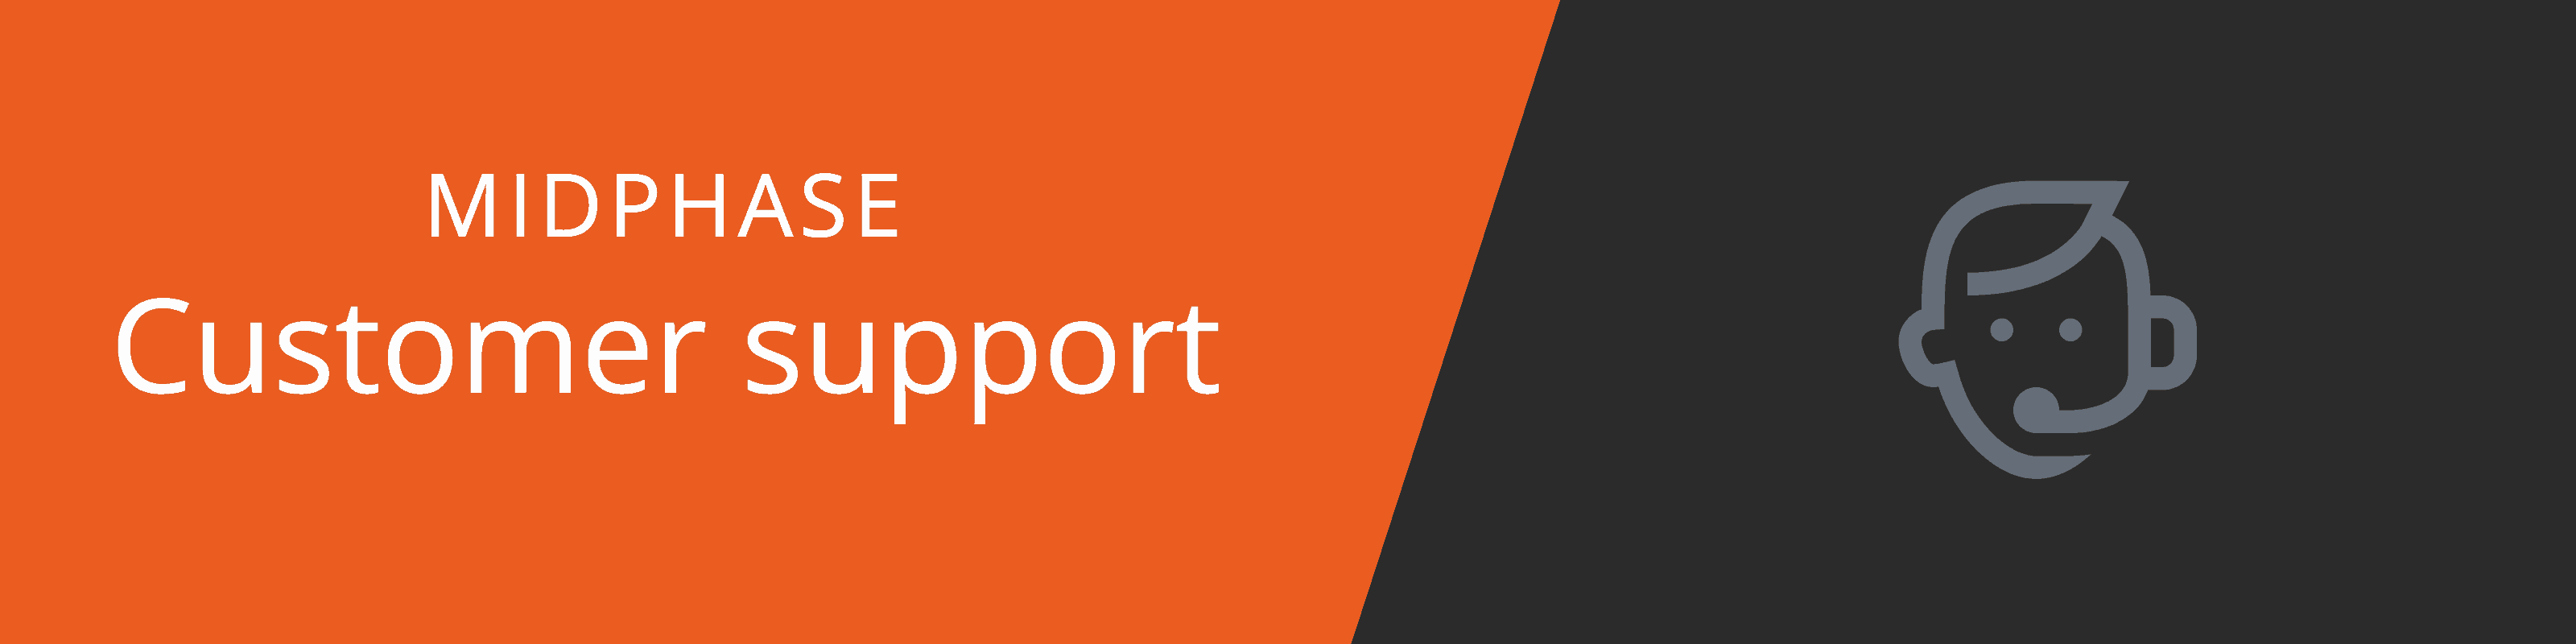 midphase-customer-support